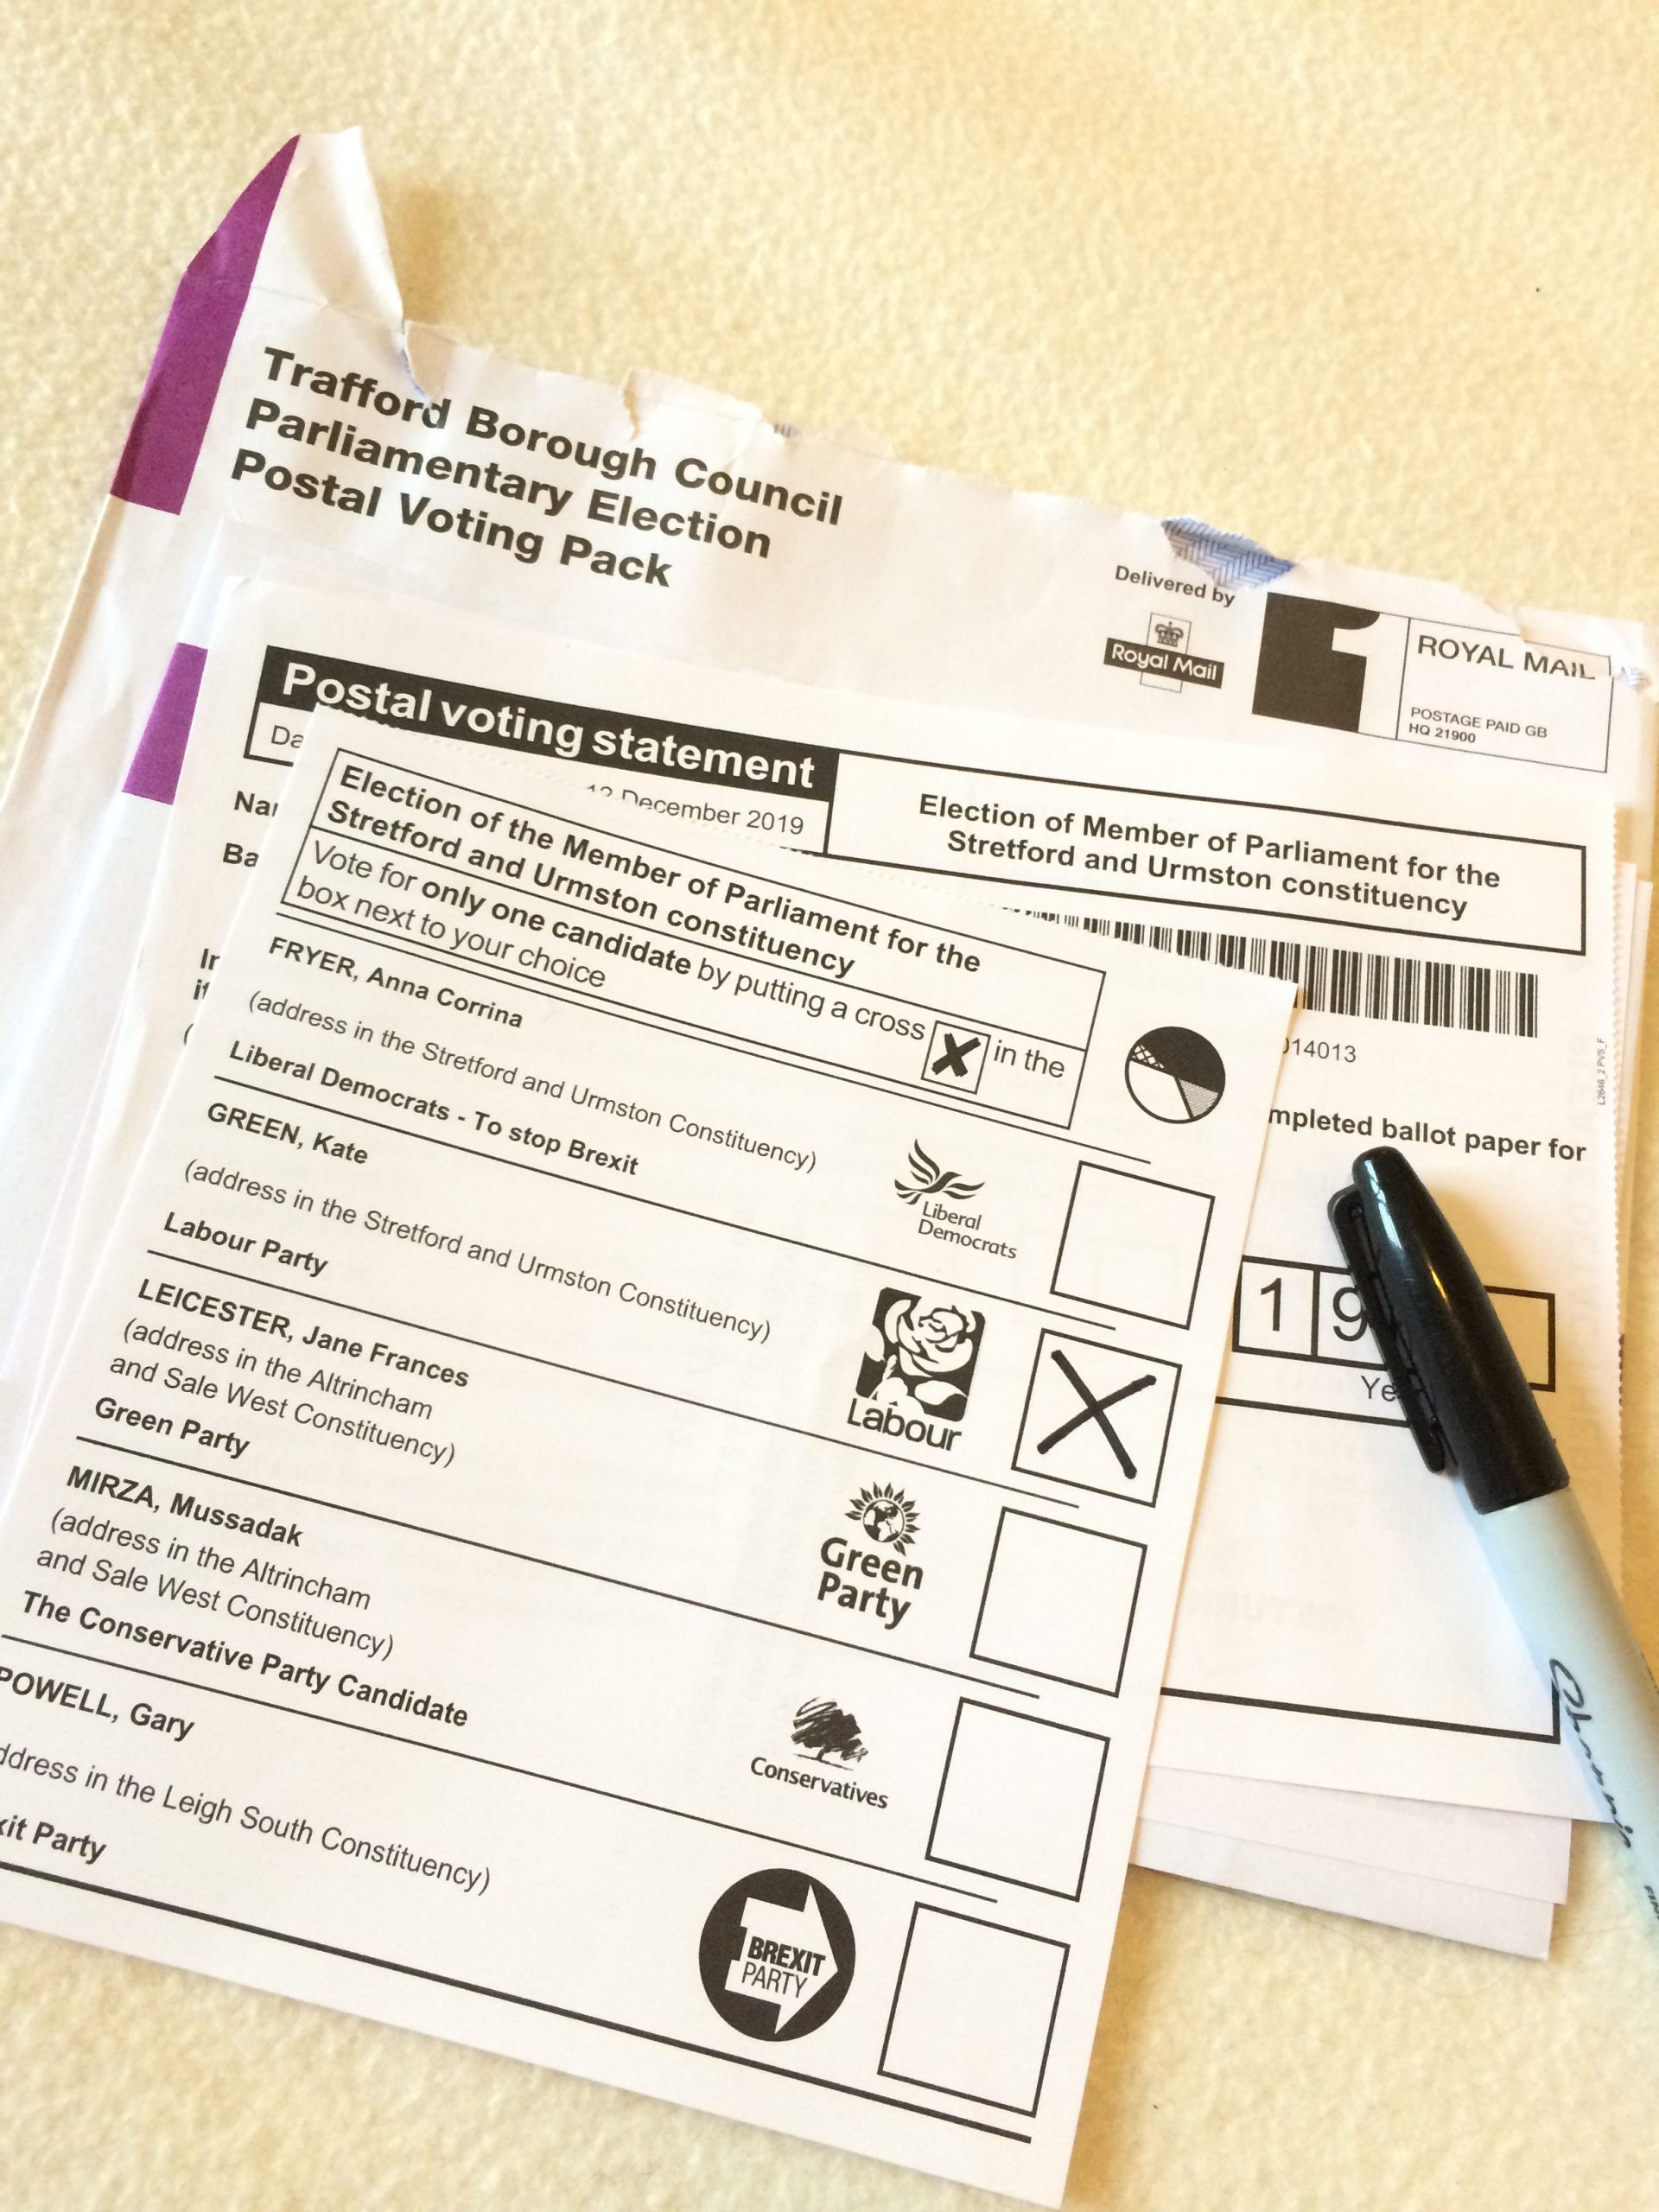 A photo of a postal vote ballot paper for the UK parliamentary elections in 2019. The box next to the Labour candidate has been marked with an 'X'.